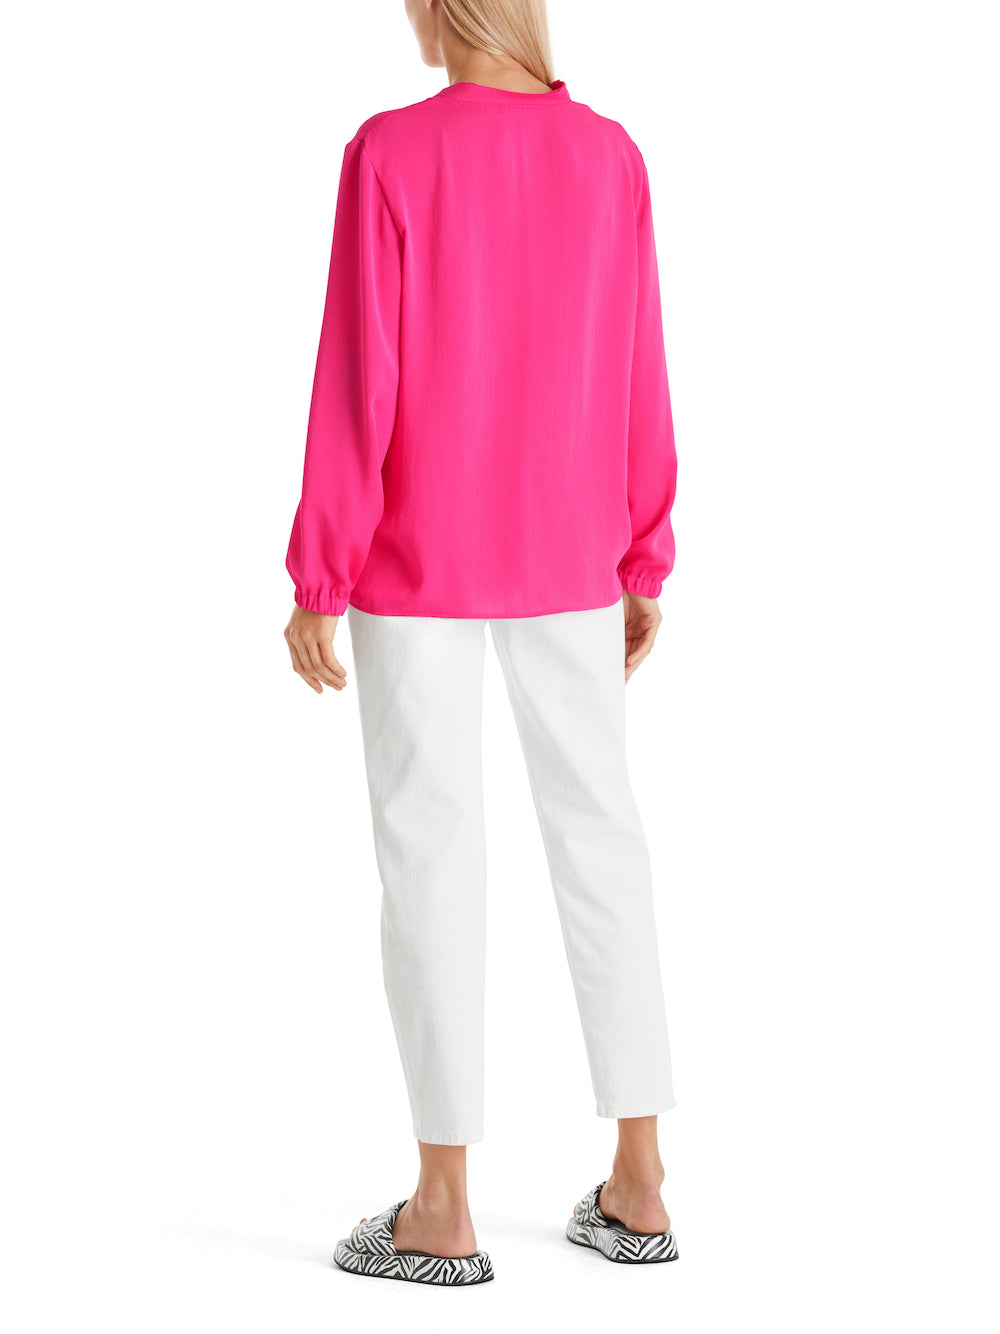 Super Pink Flowing Tunic Blouse